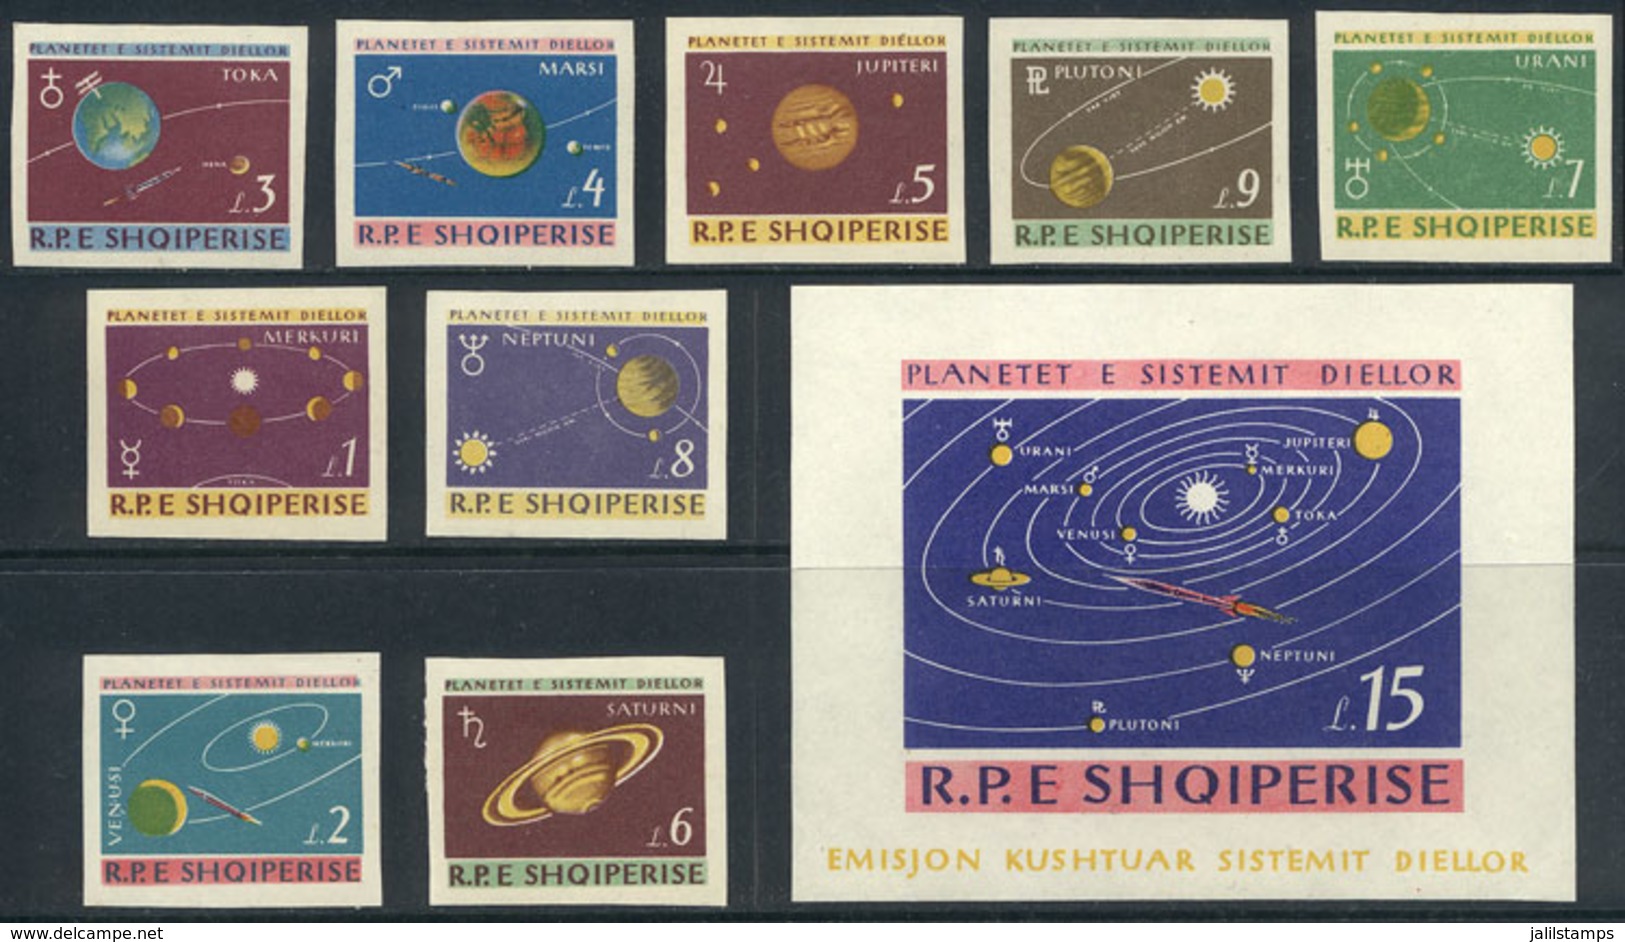 ALBANIA: Yvert 729/37 + Souvenir Sheet 6N IMPERFORATE, 1964 Planets, Complete Set Unmounted, Excellent Quality! - Albanien